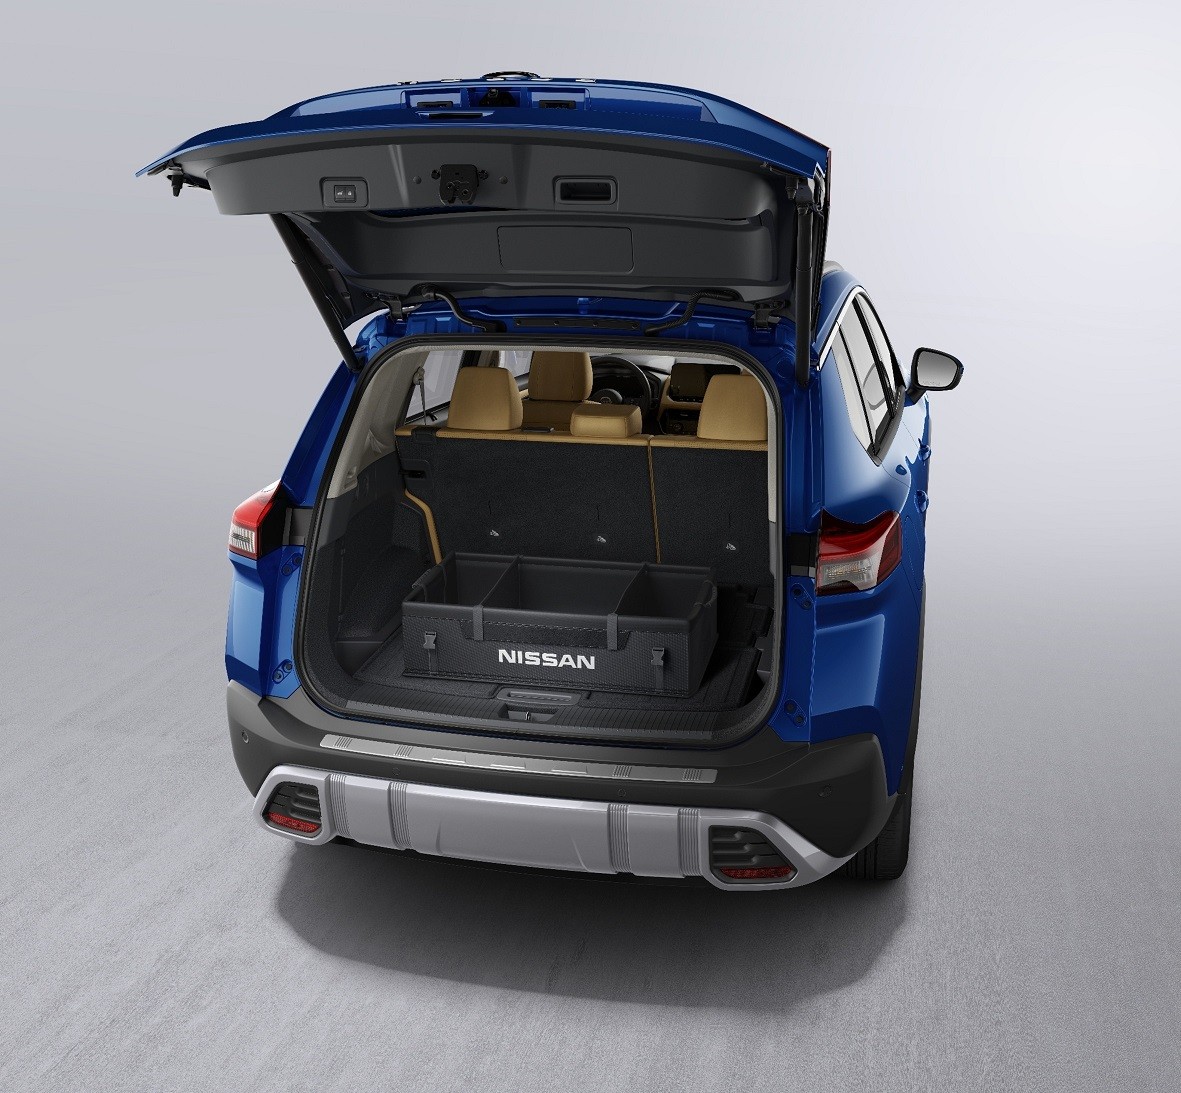 Europe's Nissan X-Trail Becomes More Versatile With Original Accessories -  autoevolution